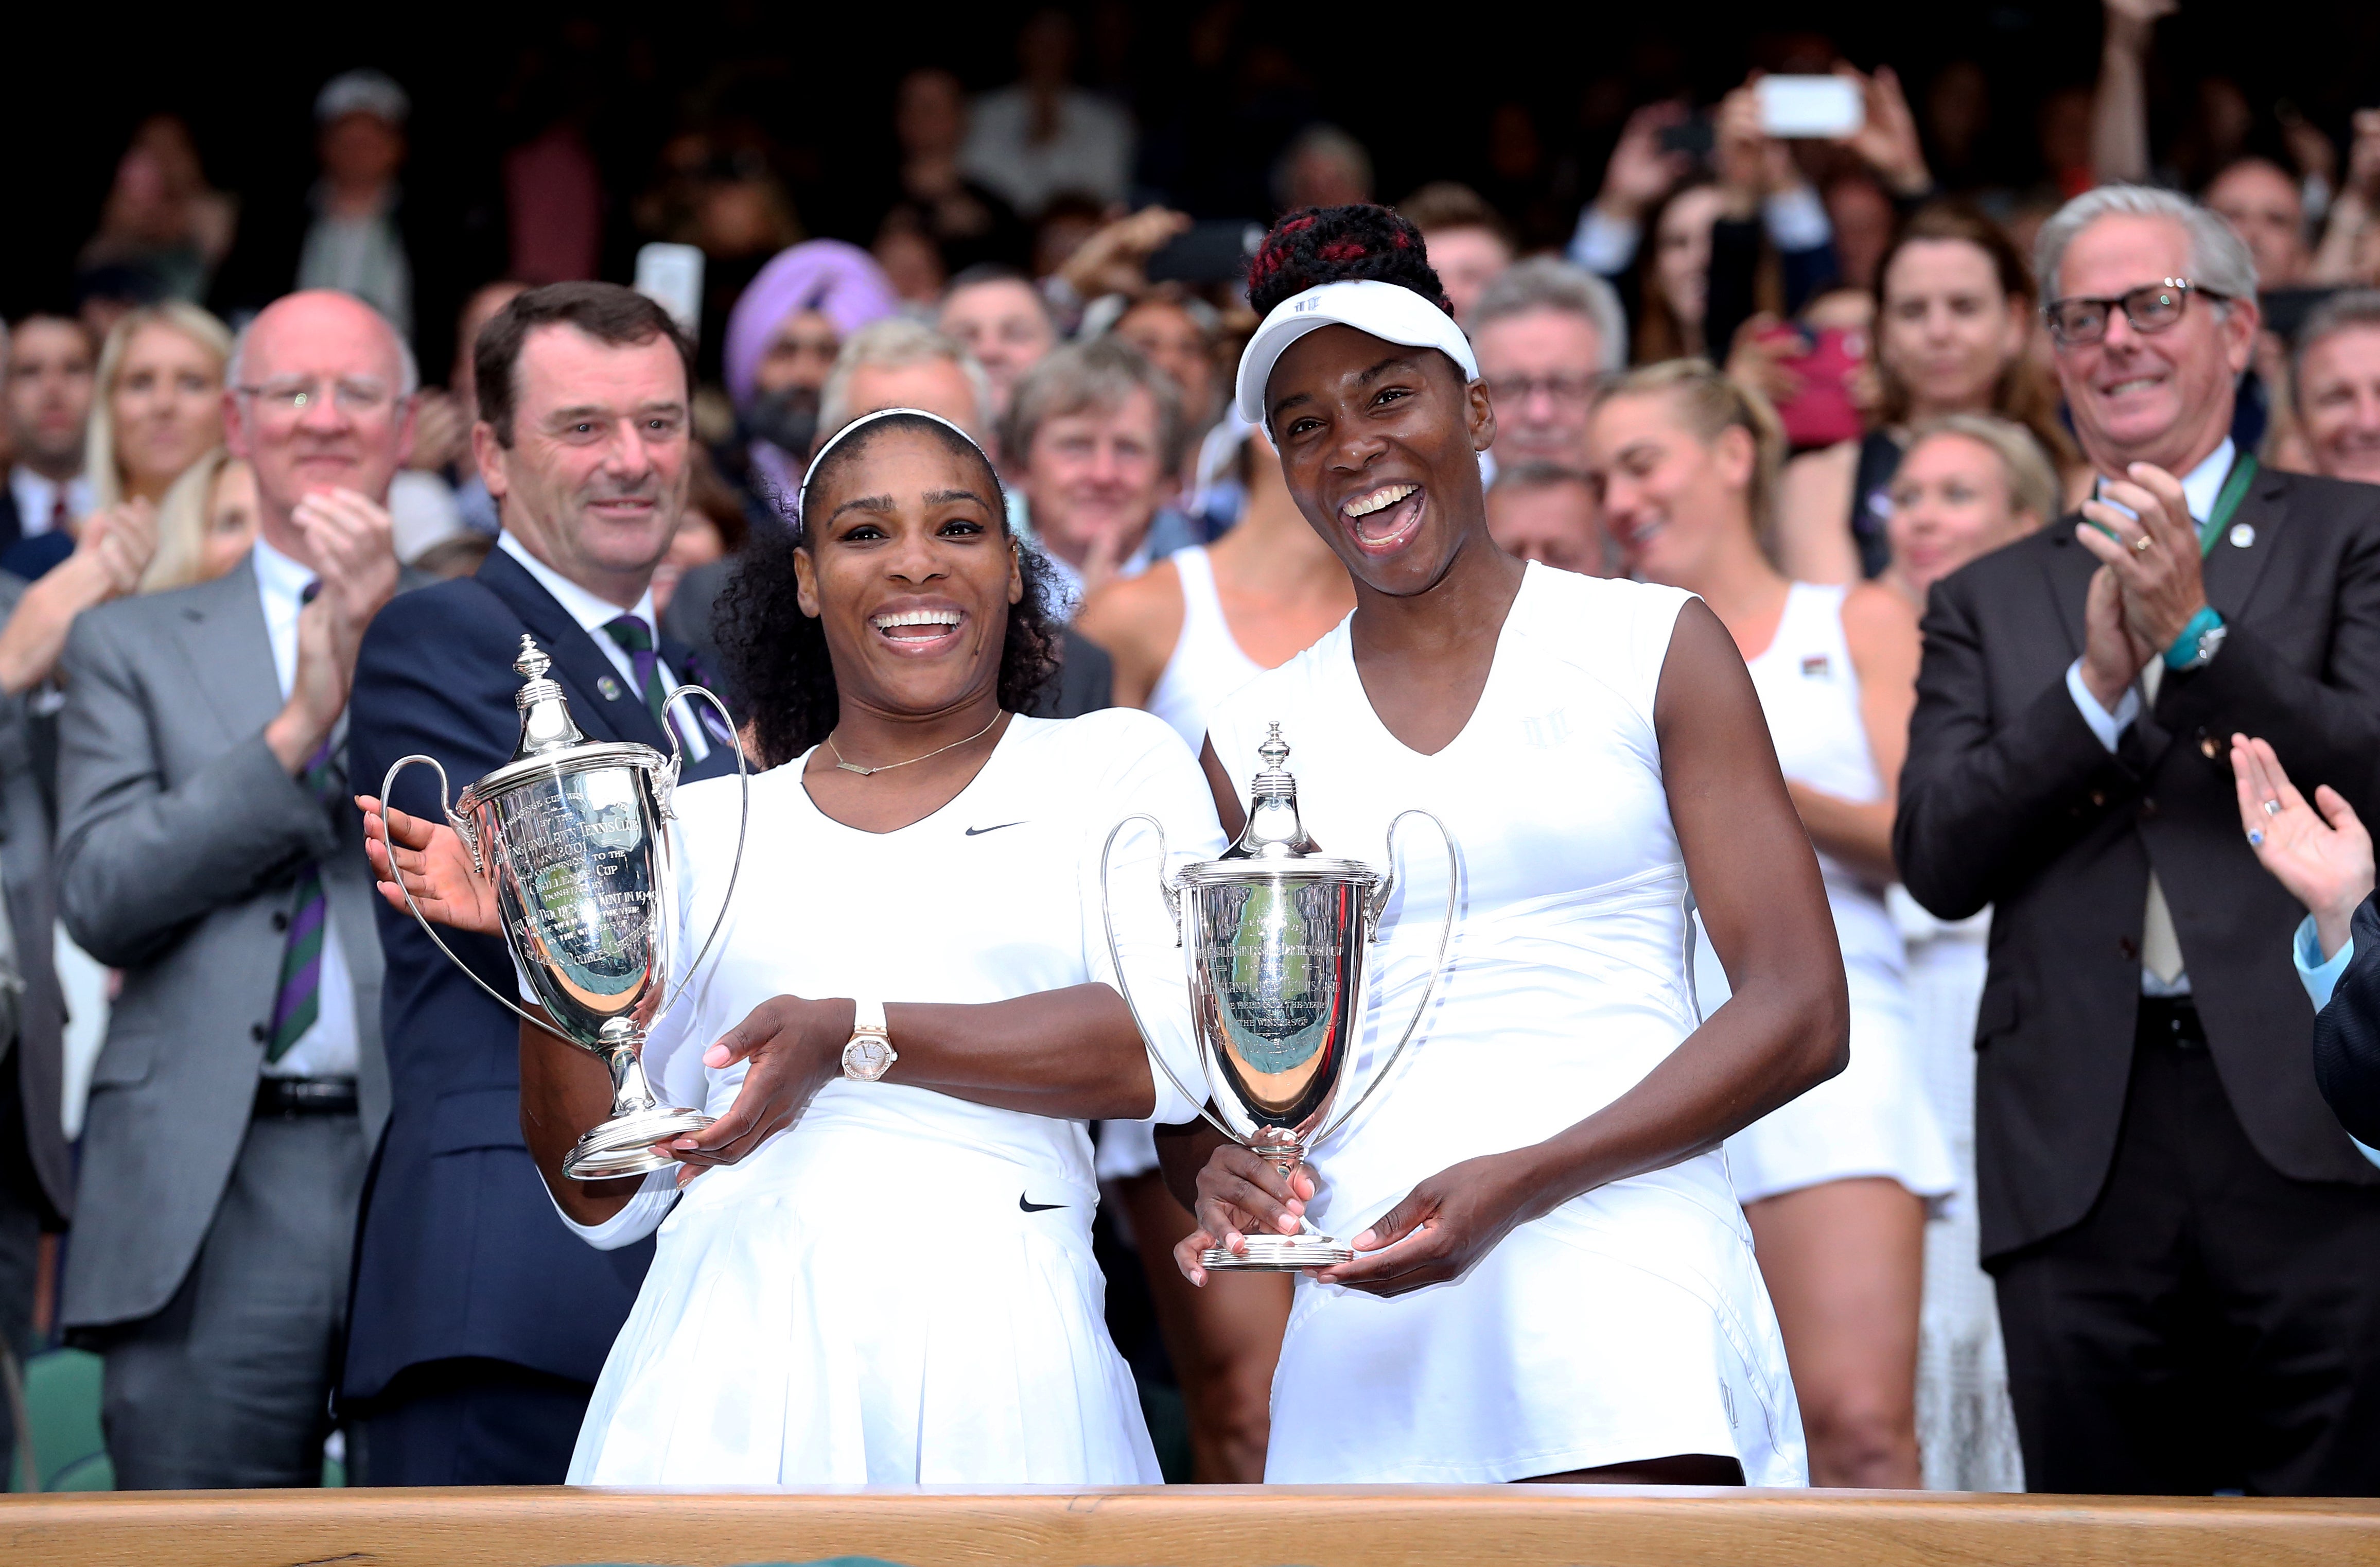 Serena and Venus Williams celebrate victory in the women’s doubles at Wimbledon (Adam Davy/PA Images).